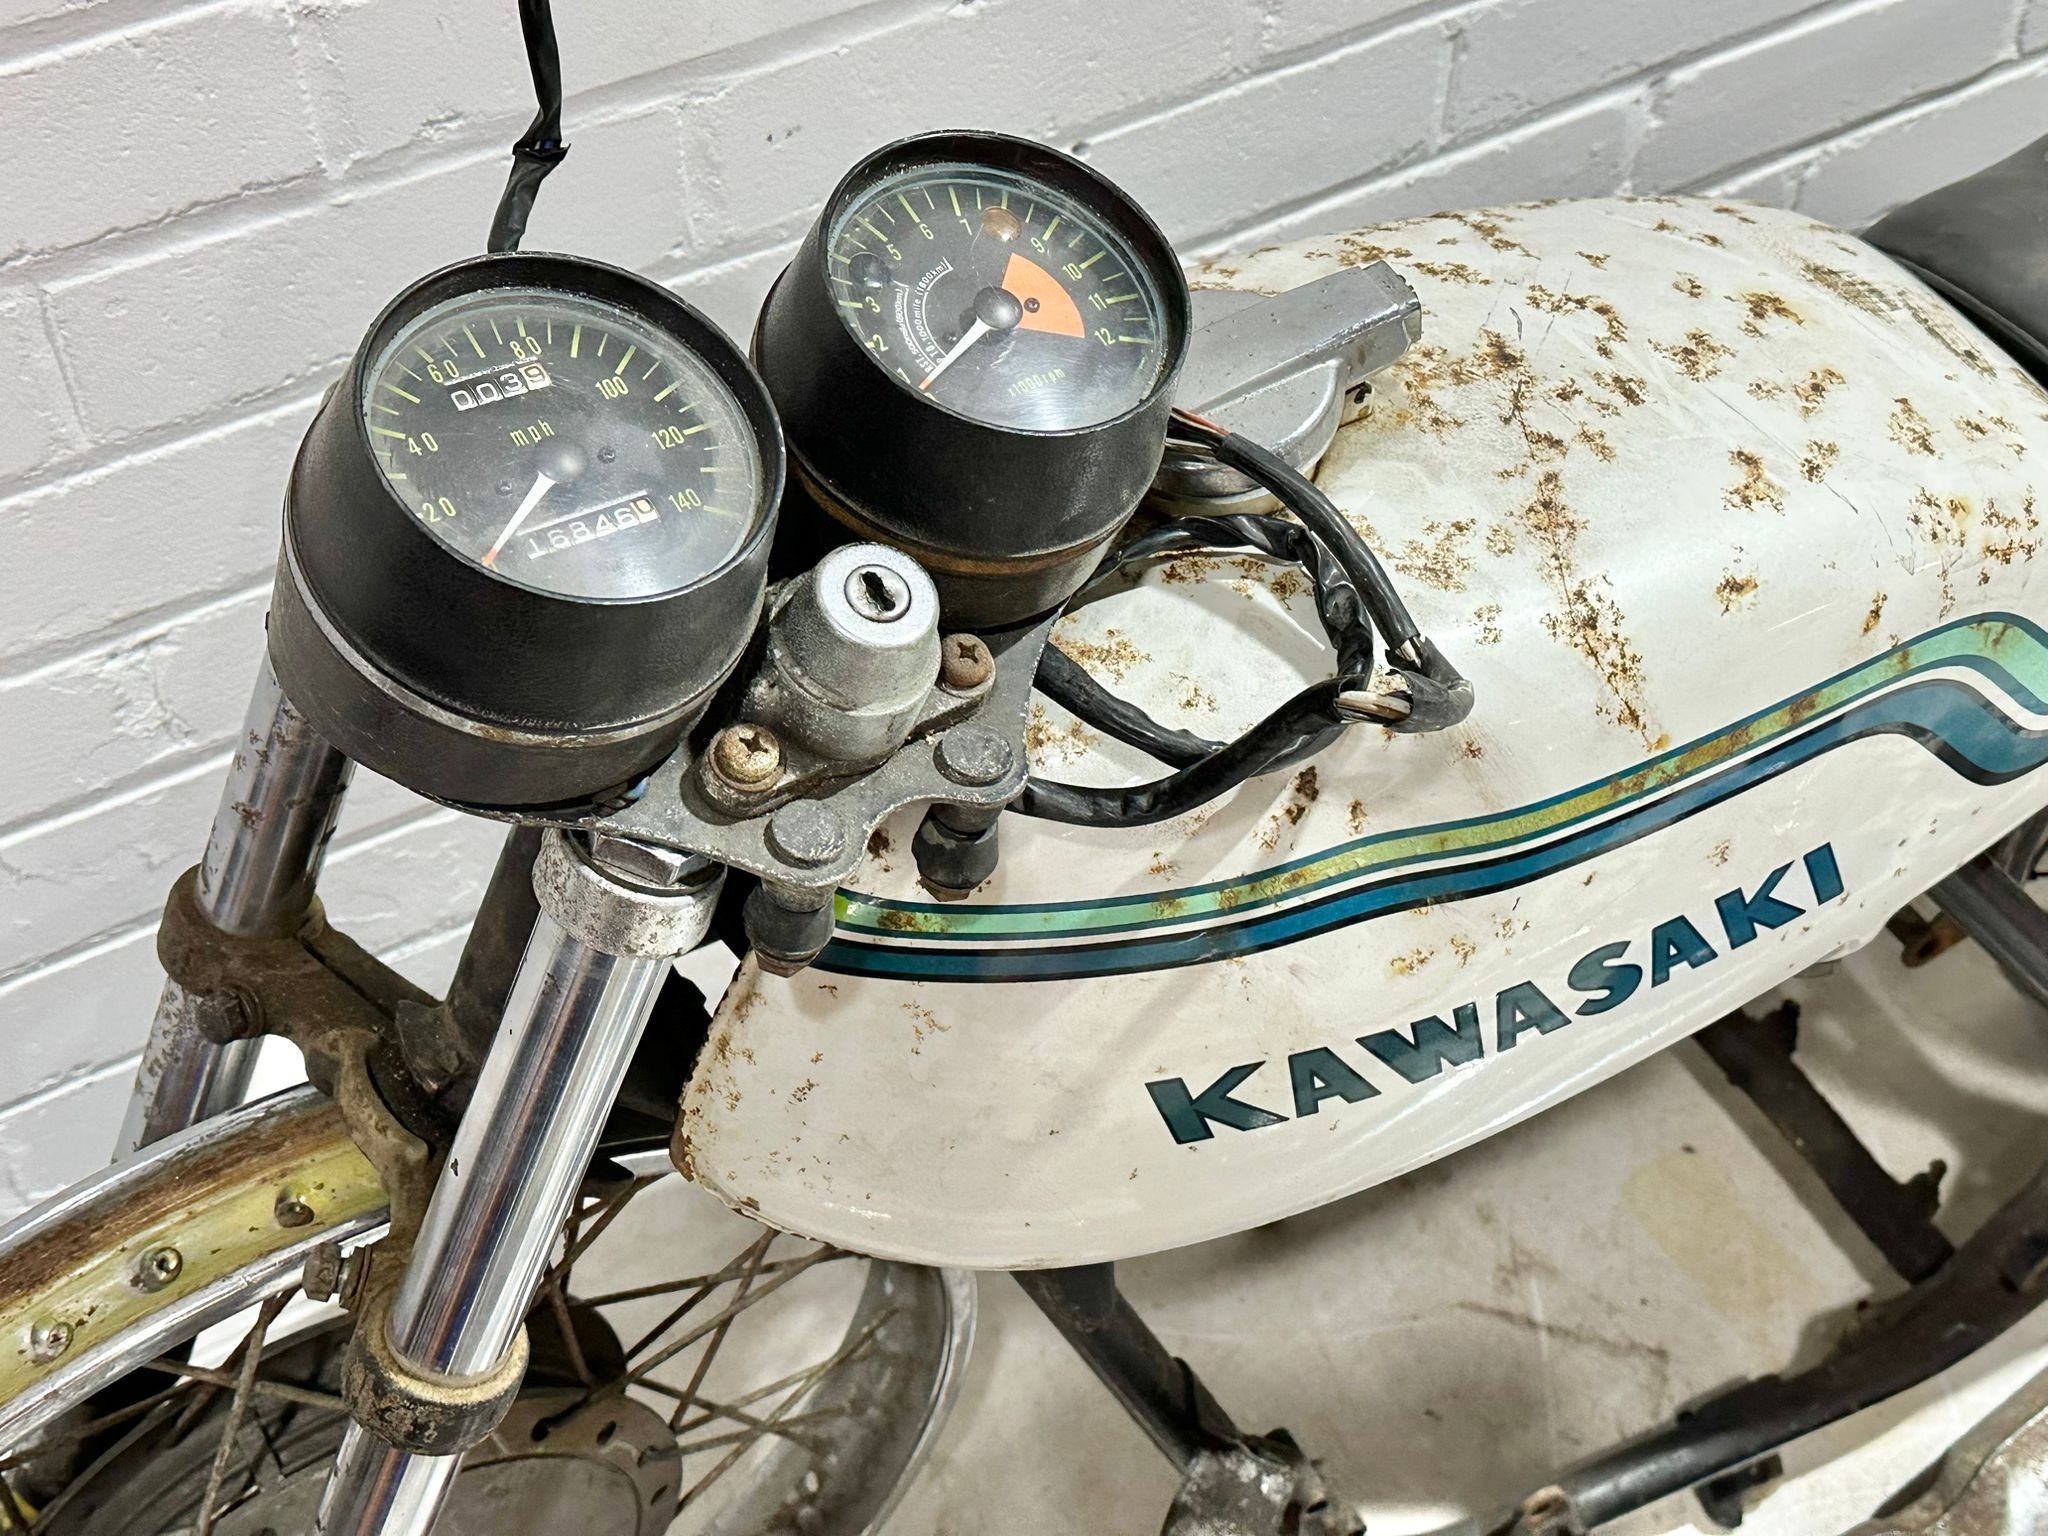 Kawasaki S1 250 White Ghost 2 stroke Frame 1972, with parts, engine and documents - Image 16 of 28